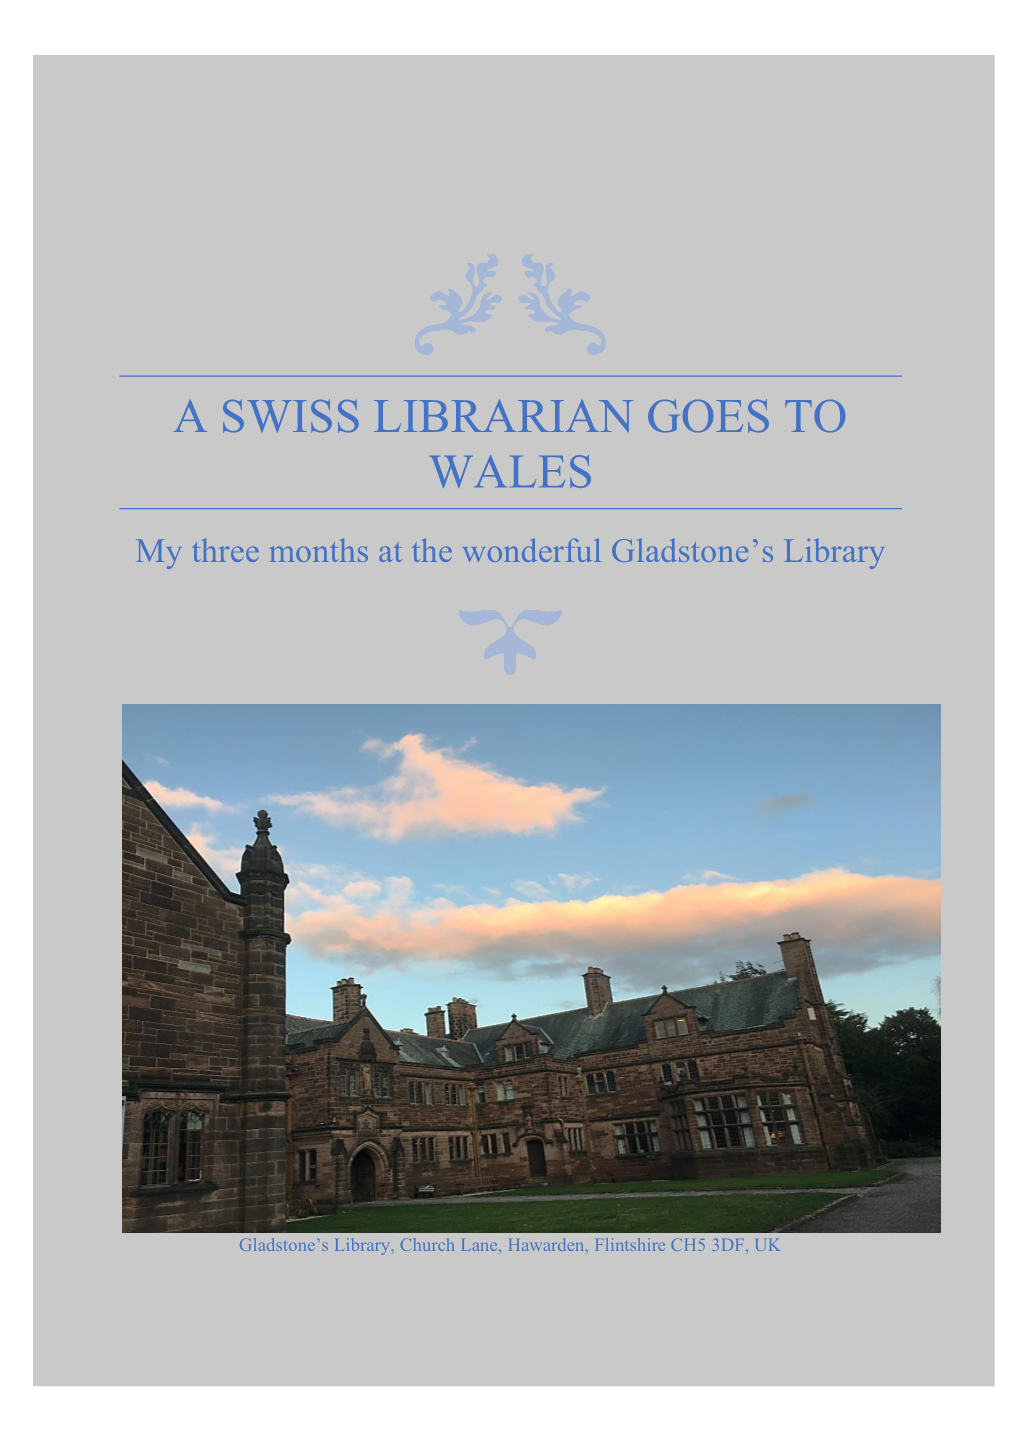 A Swiss Librarian Goes to Wales